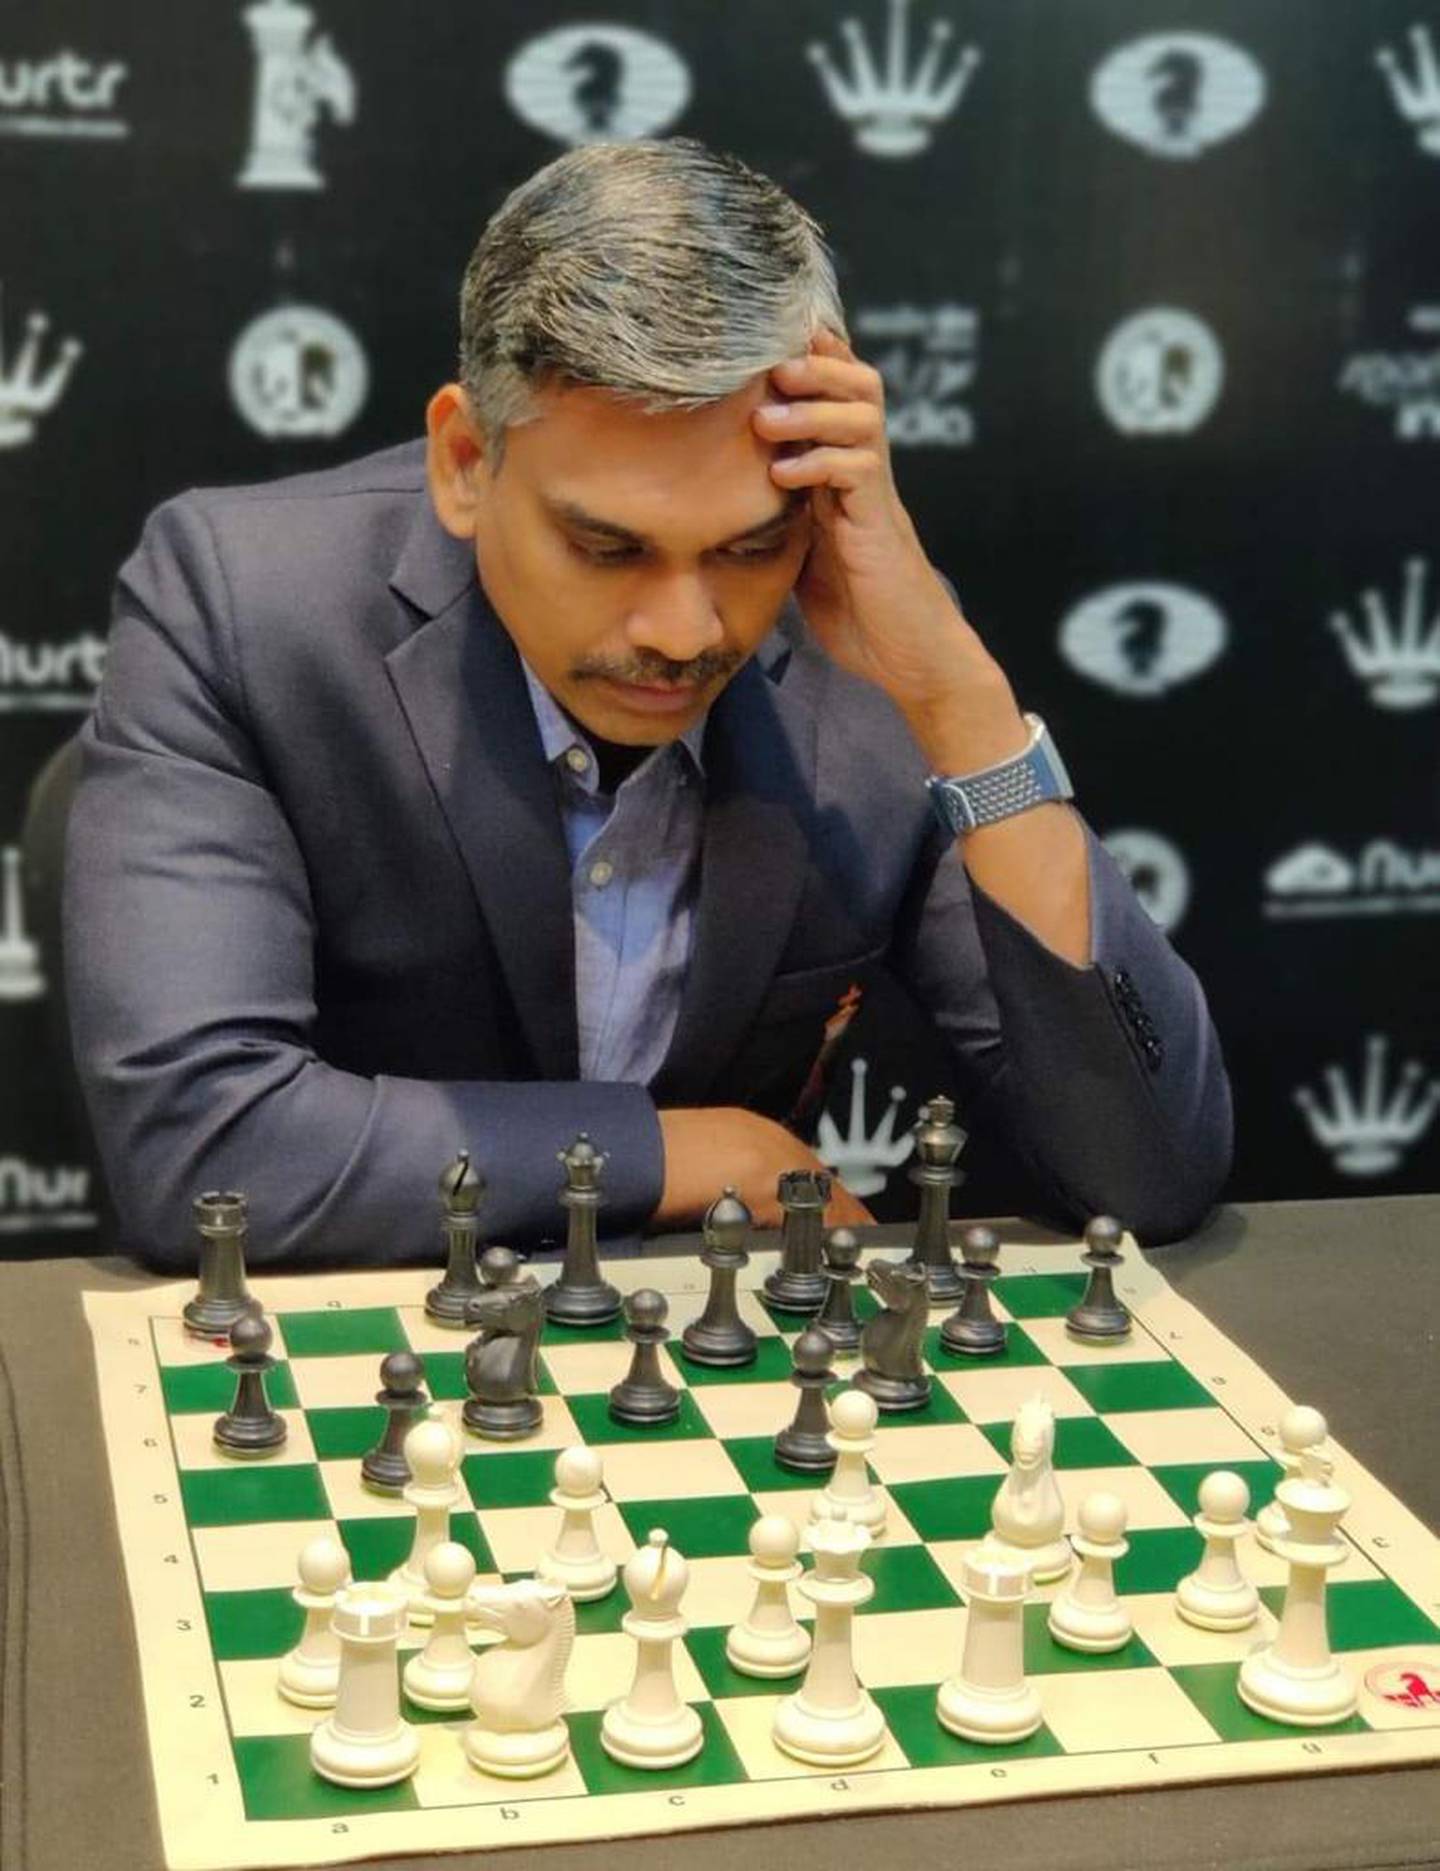 After quitting his full-time job, grandmaster RB Ramesh set up Chess Gurukul in 2008 in Chennai with his wife Aarthie Ramaswamy and they have trained some of India's best players in recent years. Photo: GB Ramesh